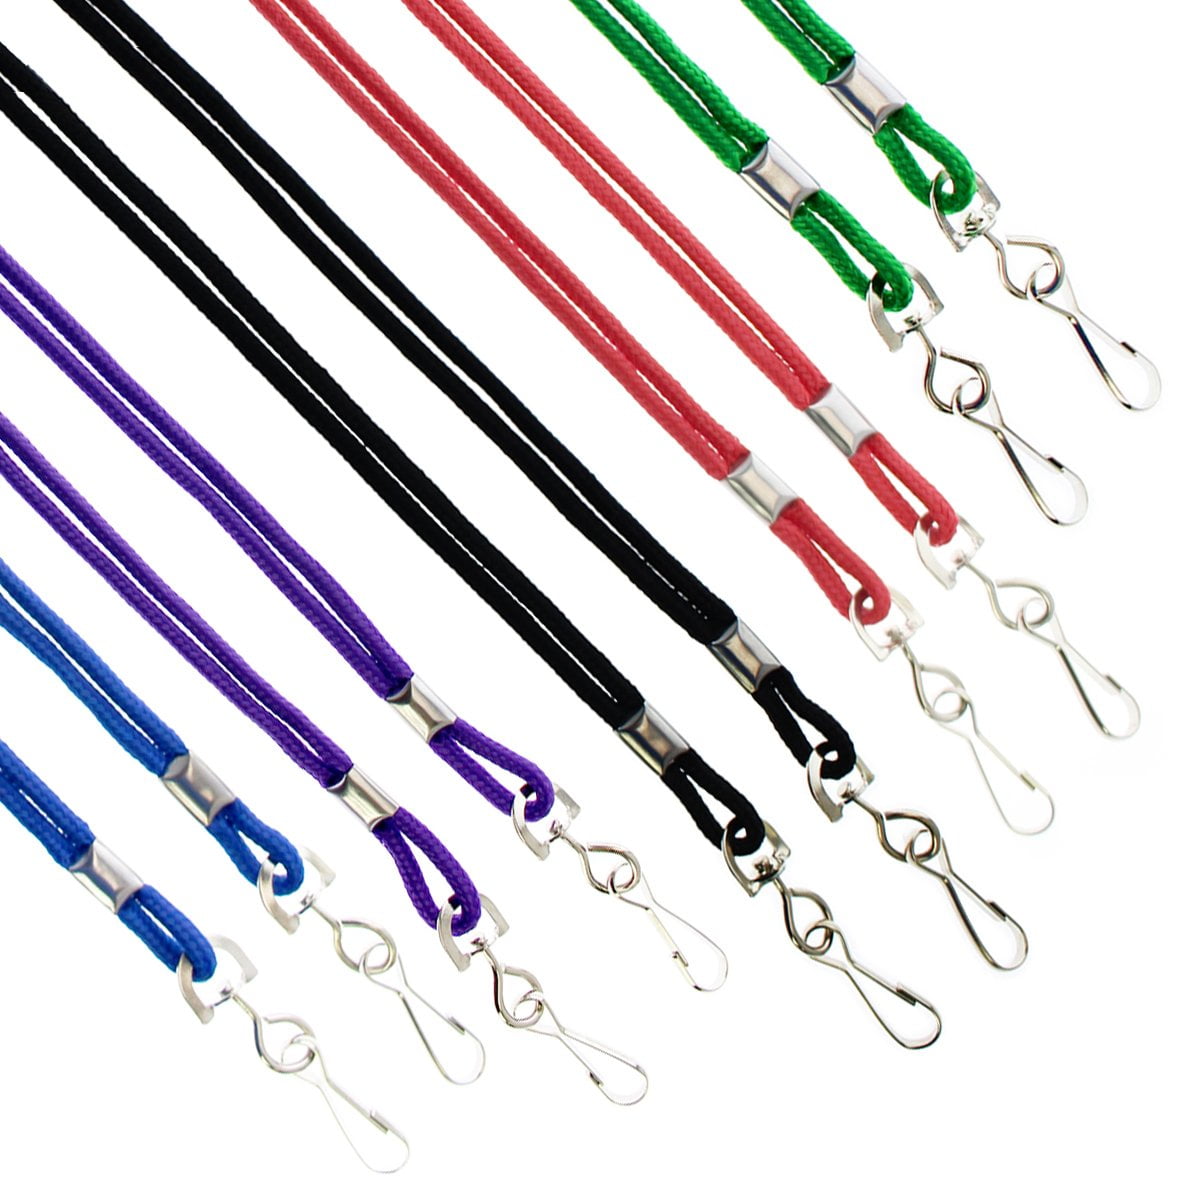 Black Lanyards Bulk Lanyards Durable Flat Lanyard for ID Badge Neck Lanyard Swivel J-Hook for Men Woven Kids Employees Business Card Students ID Card and Badge Holders Pack of 100 Lanyards